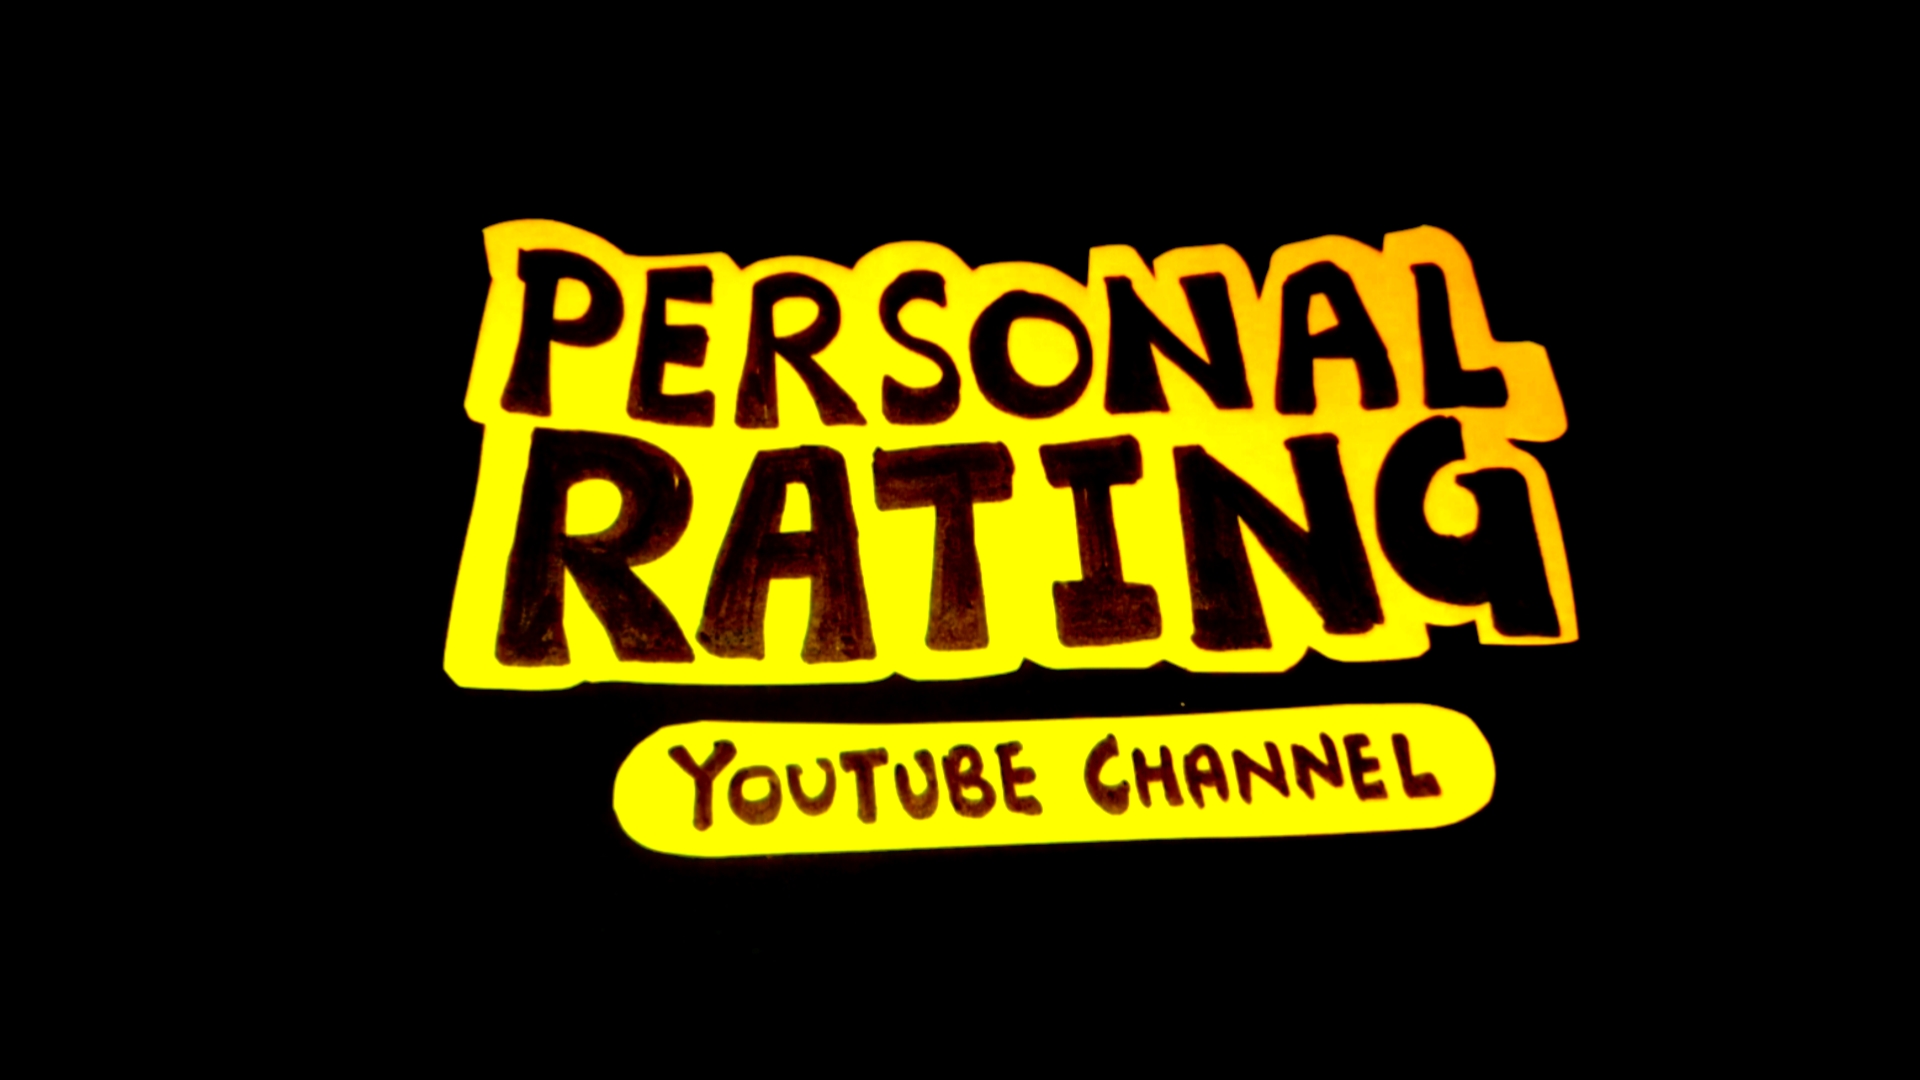 Personal Rating